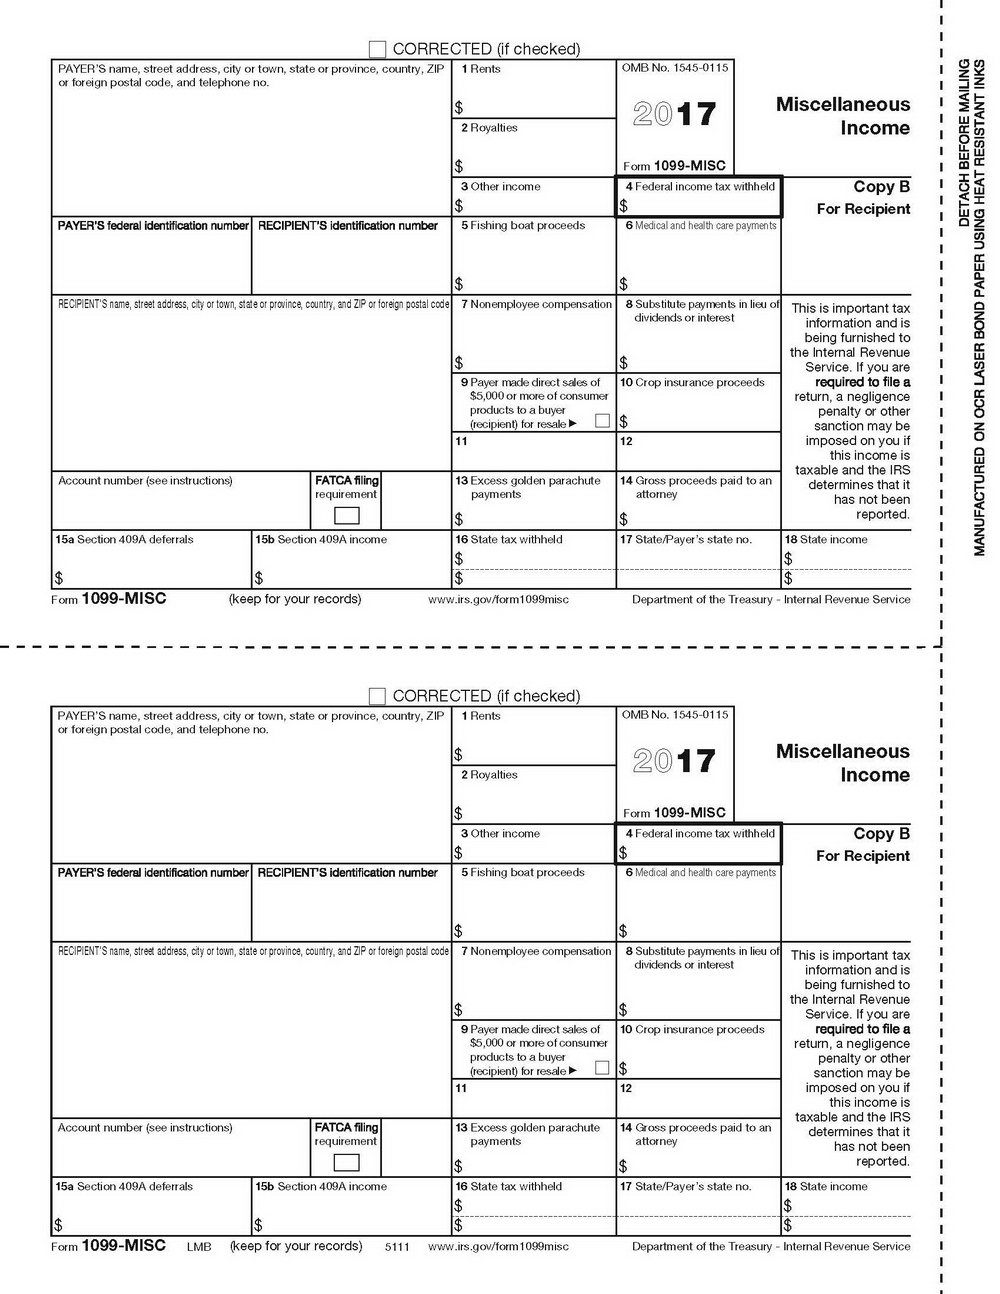 Printable 1099 Form 2017 Free | Mbm Legal - Free Printable 1099 Misc Forms